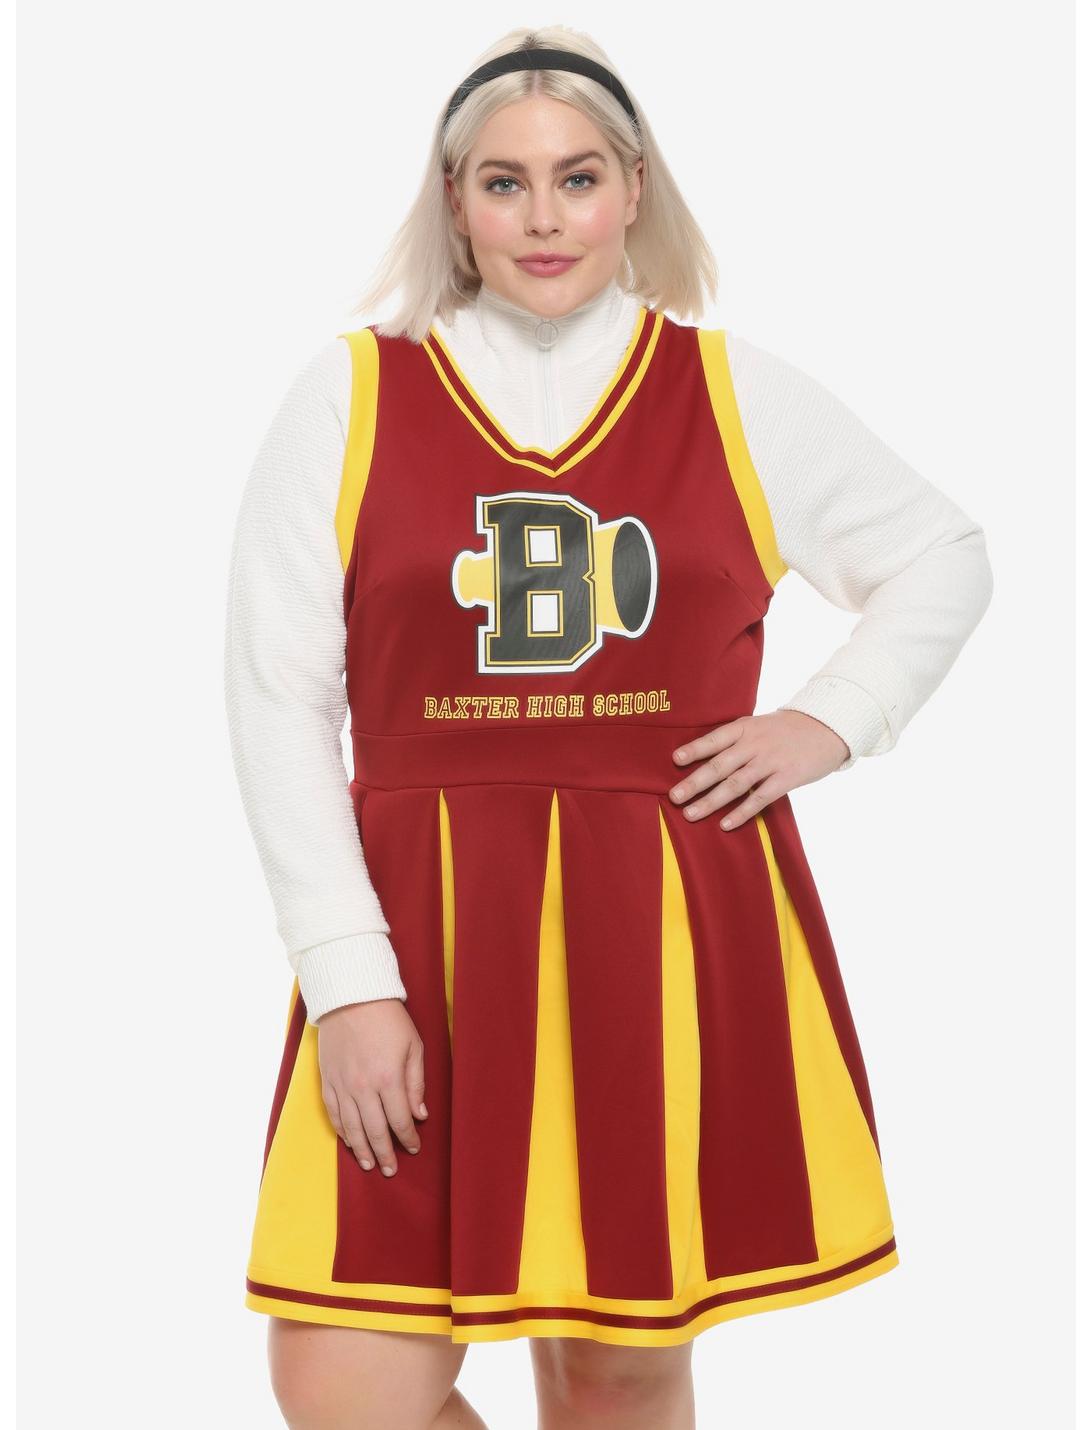 Chilling Adventures Of Sabrina Baxter High Cheer Dress Plus Size, MAROON, hi-res